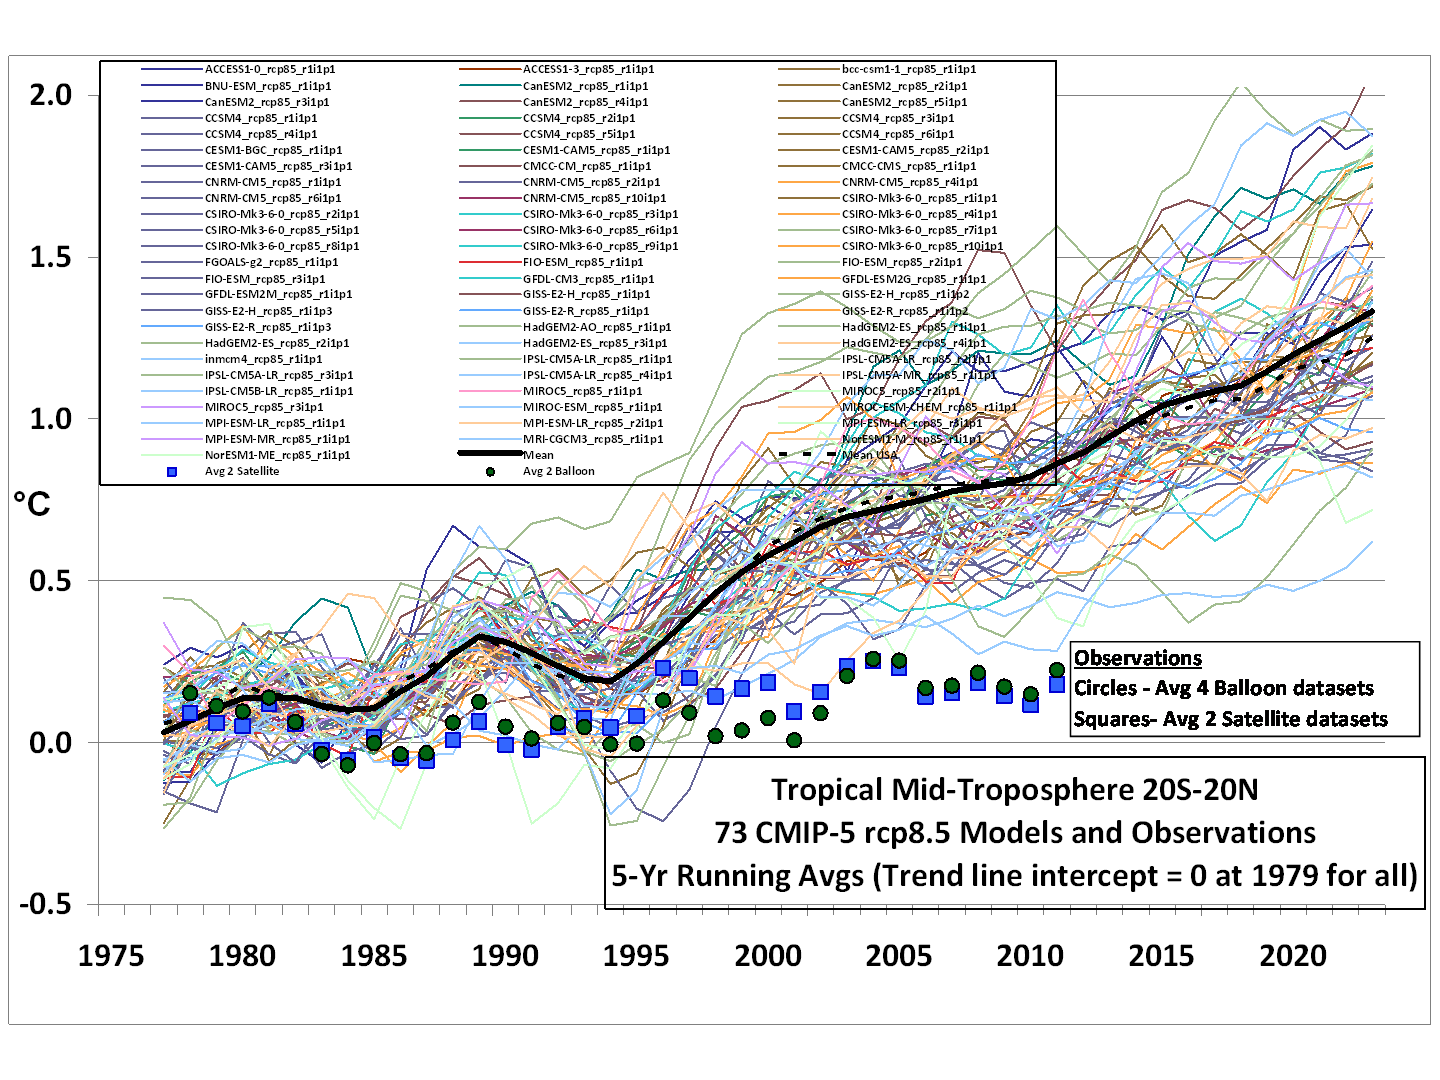 Climate models and observations